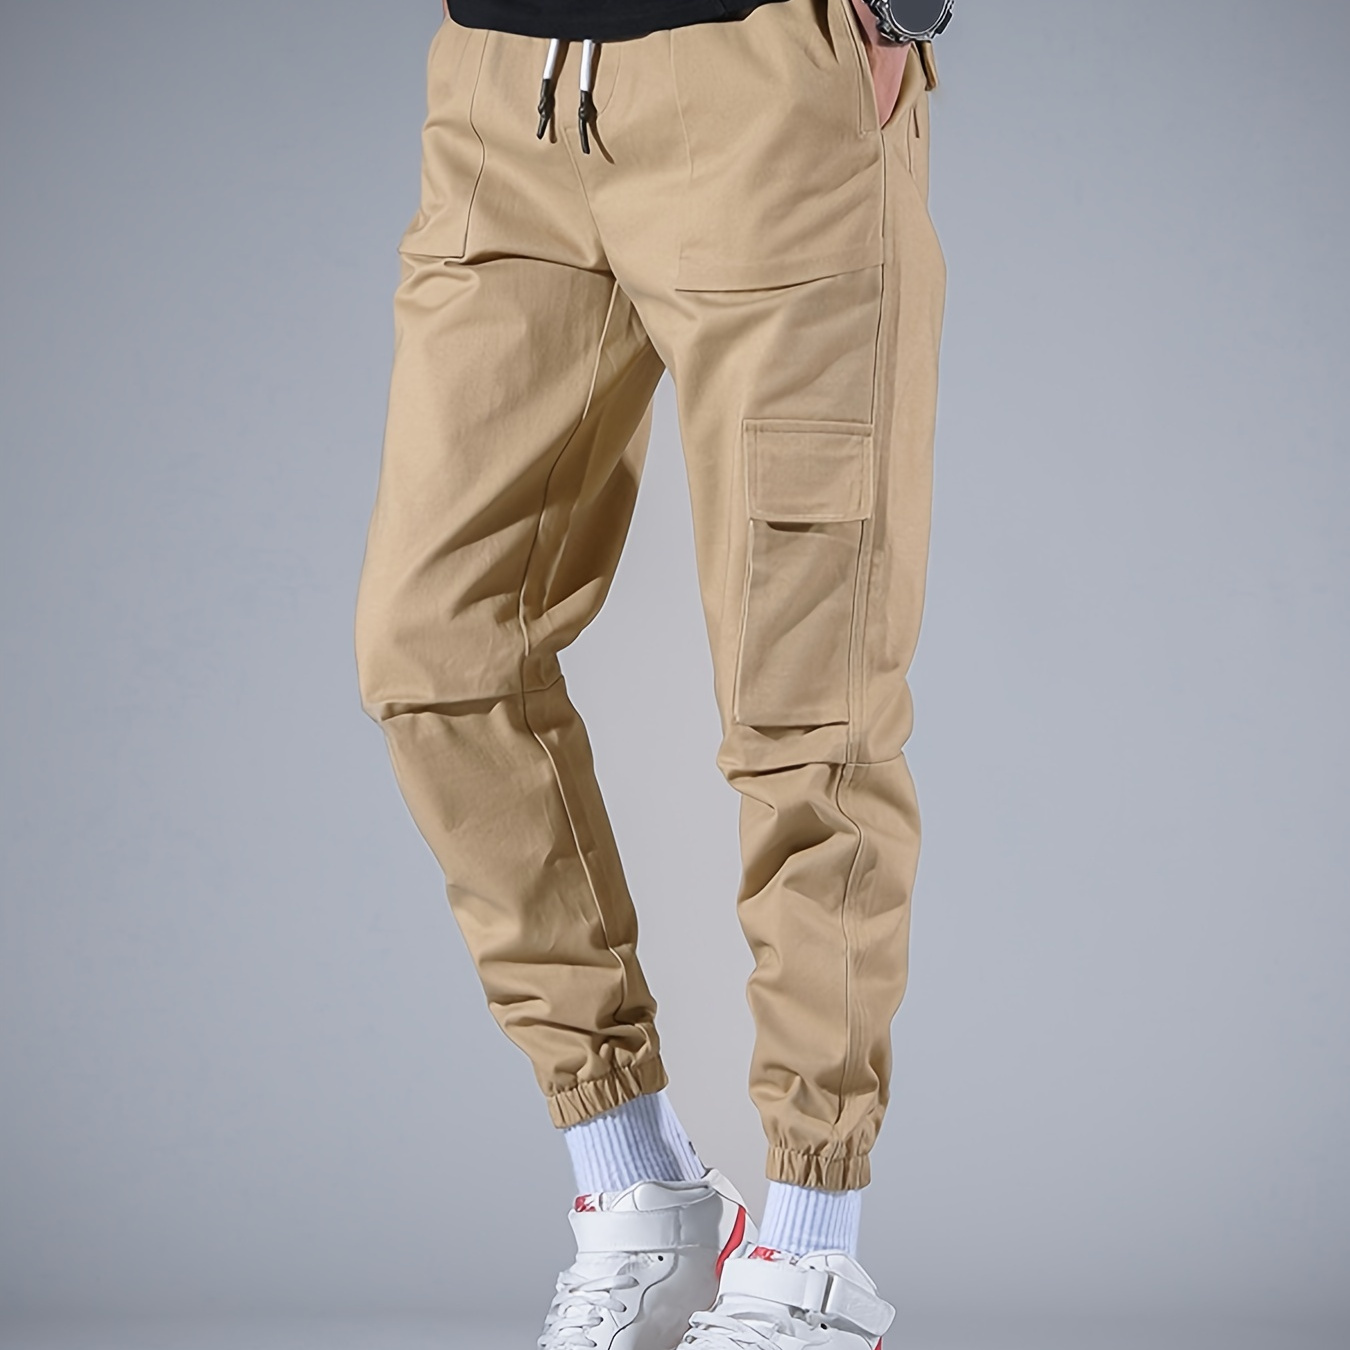 Men's Drawstring Waist Cargo Pants For Big And Tall Guys Best Sellers ...